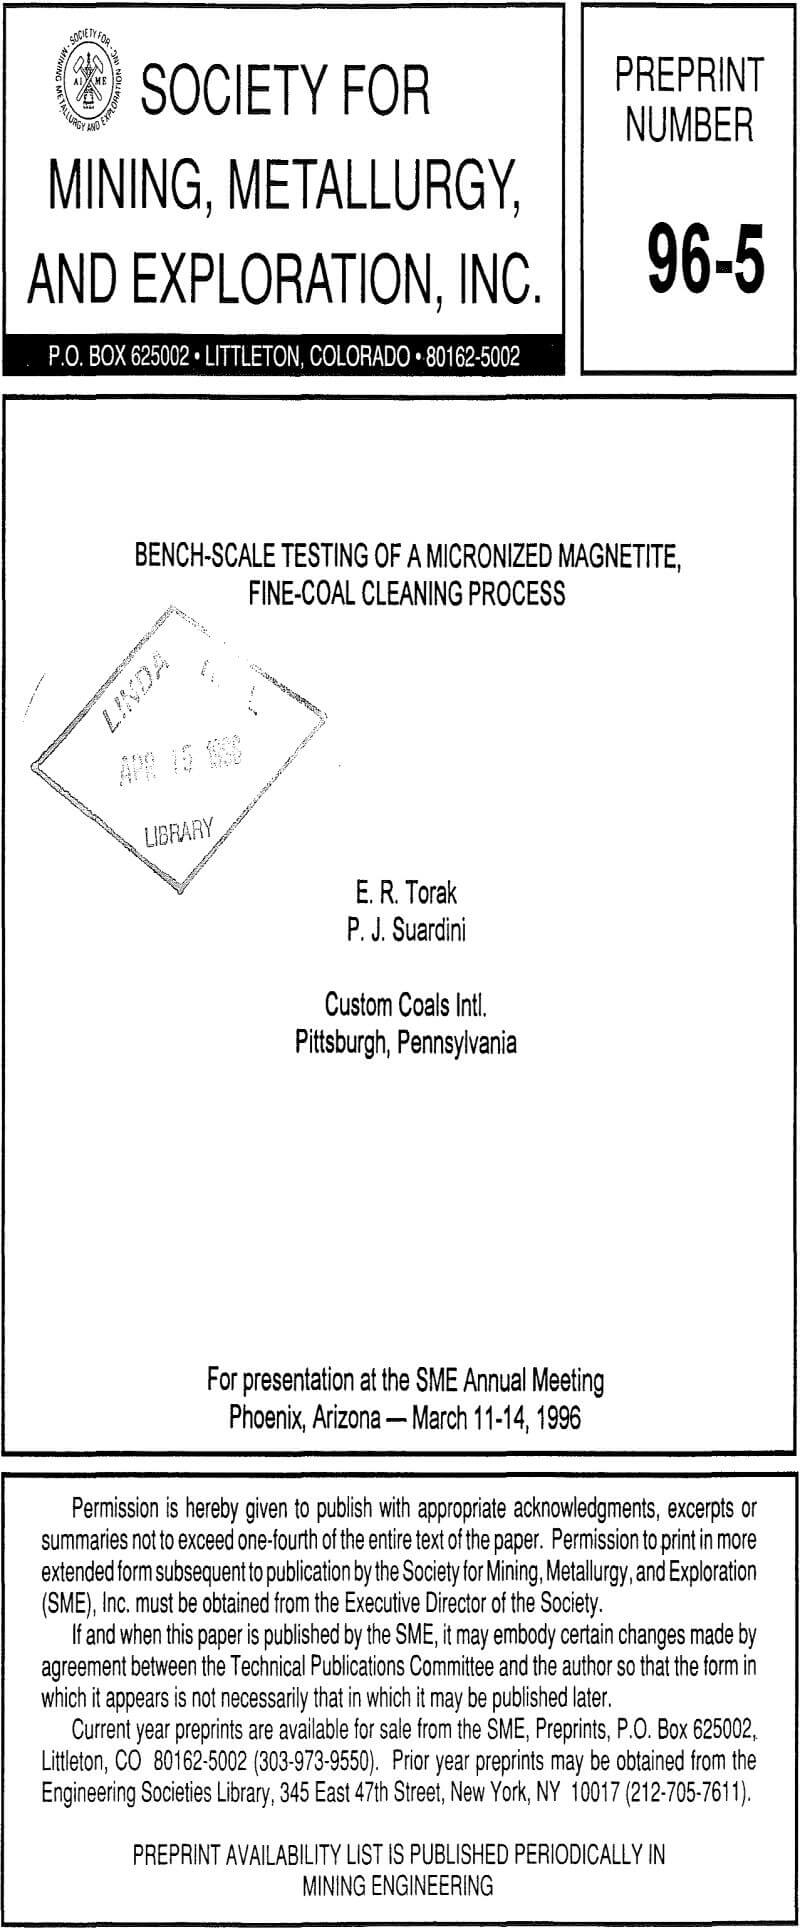 bench-scale testing of a micronized magnetite fine-coal cleaning process